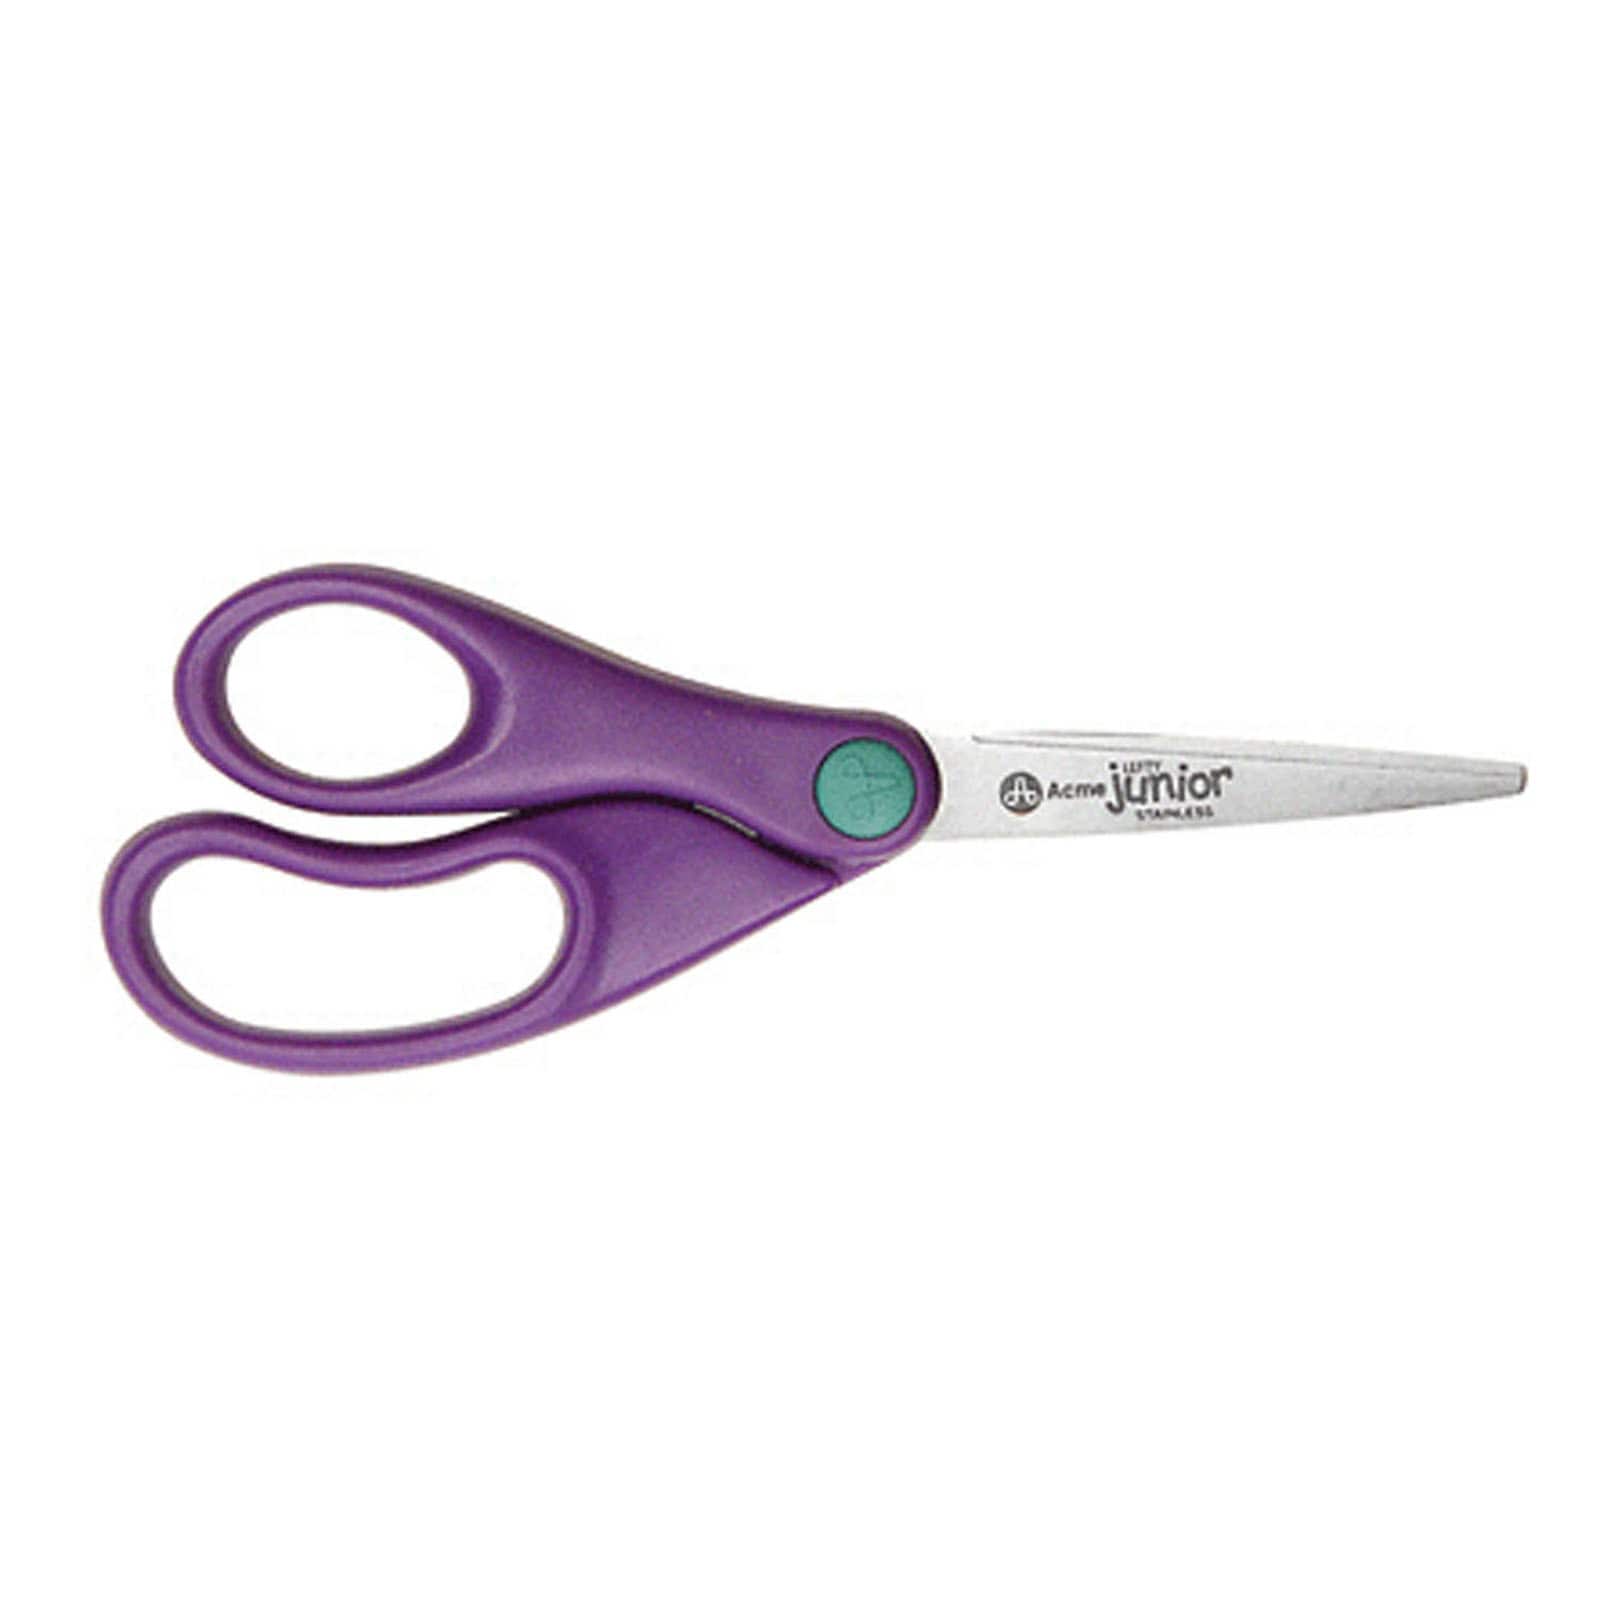 Acme Double Sharp Point Scissors 5 in. 5 in.; Two sharp points